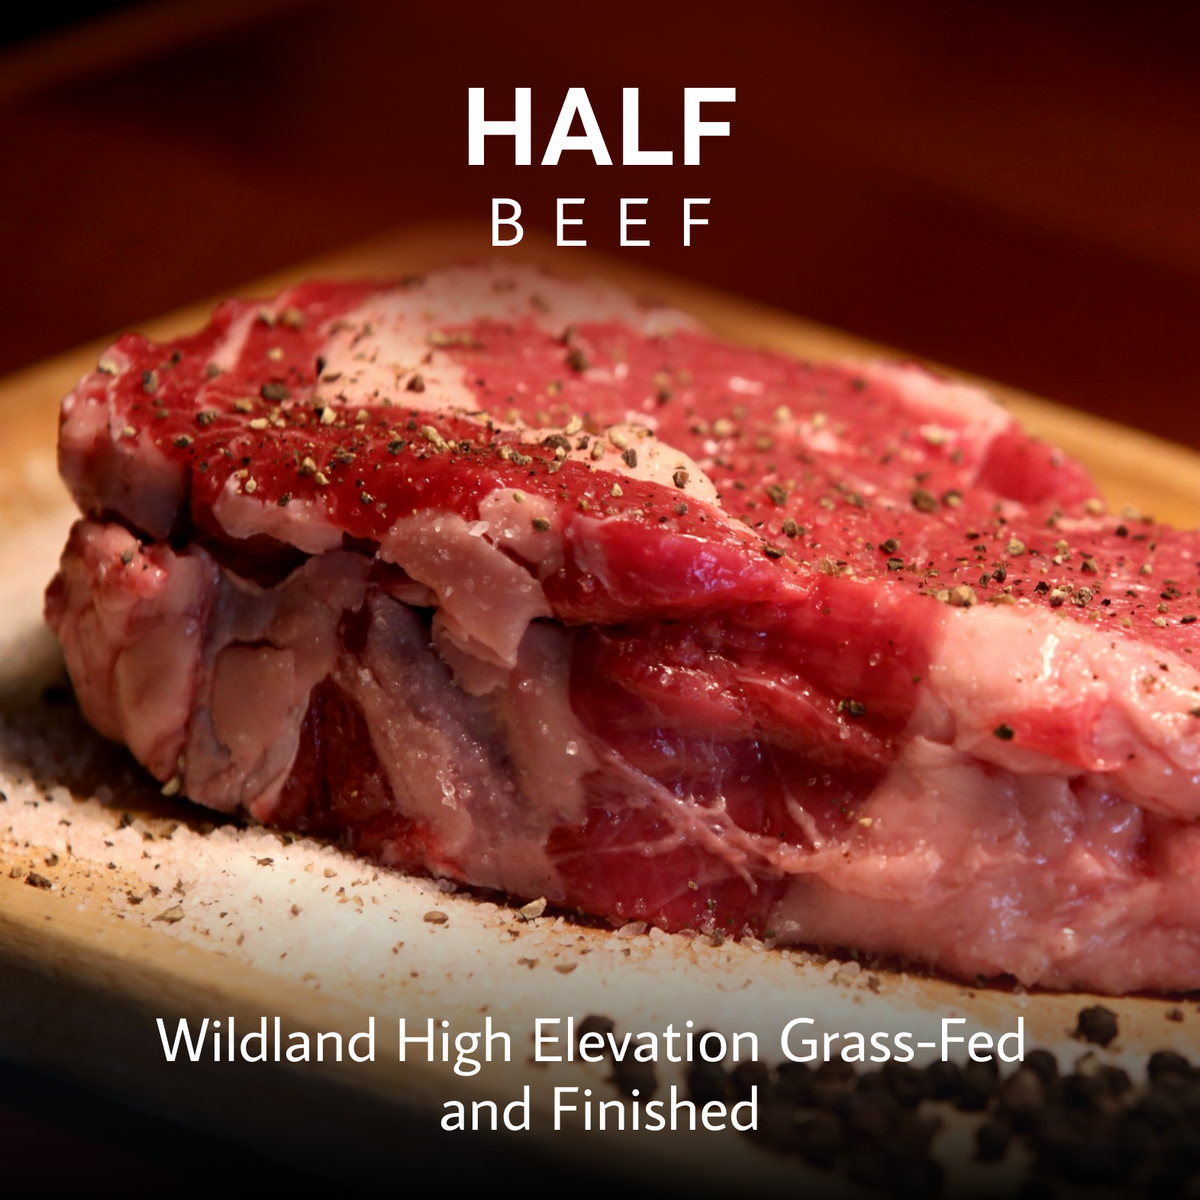 Half Beef (200lbs) | $500 deposit now (pay $2578 later) | $3078 total | $15.39/lb